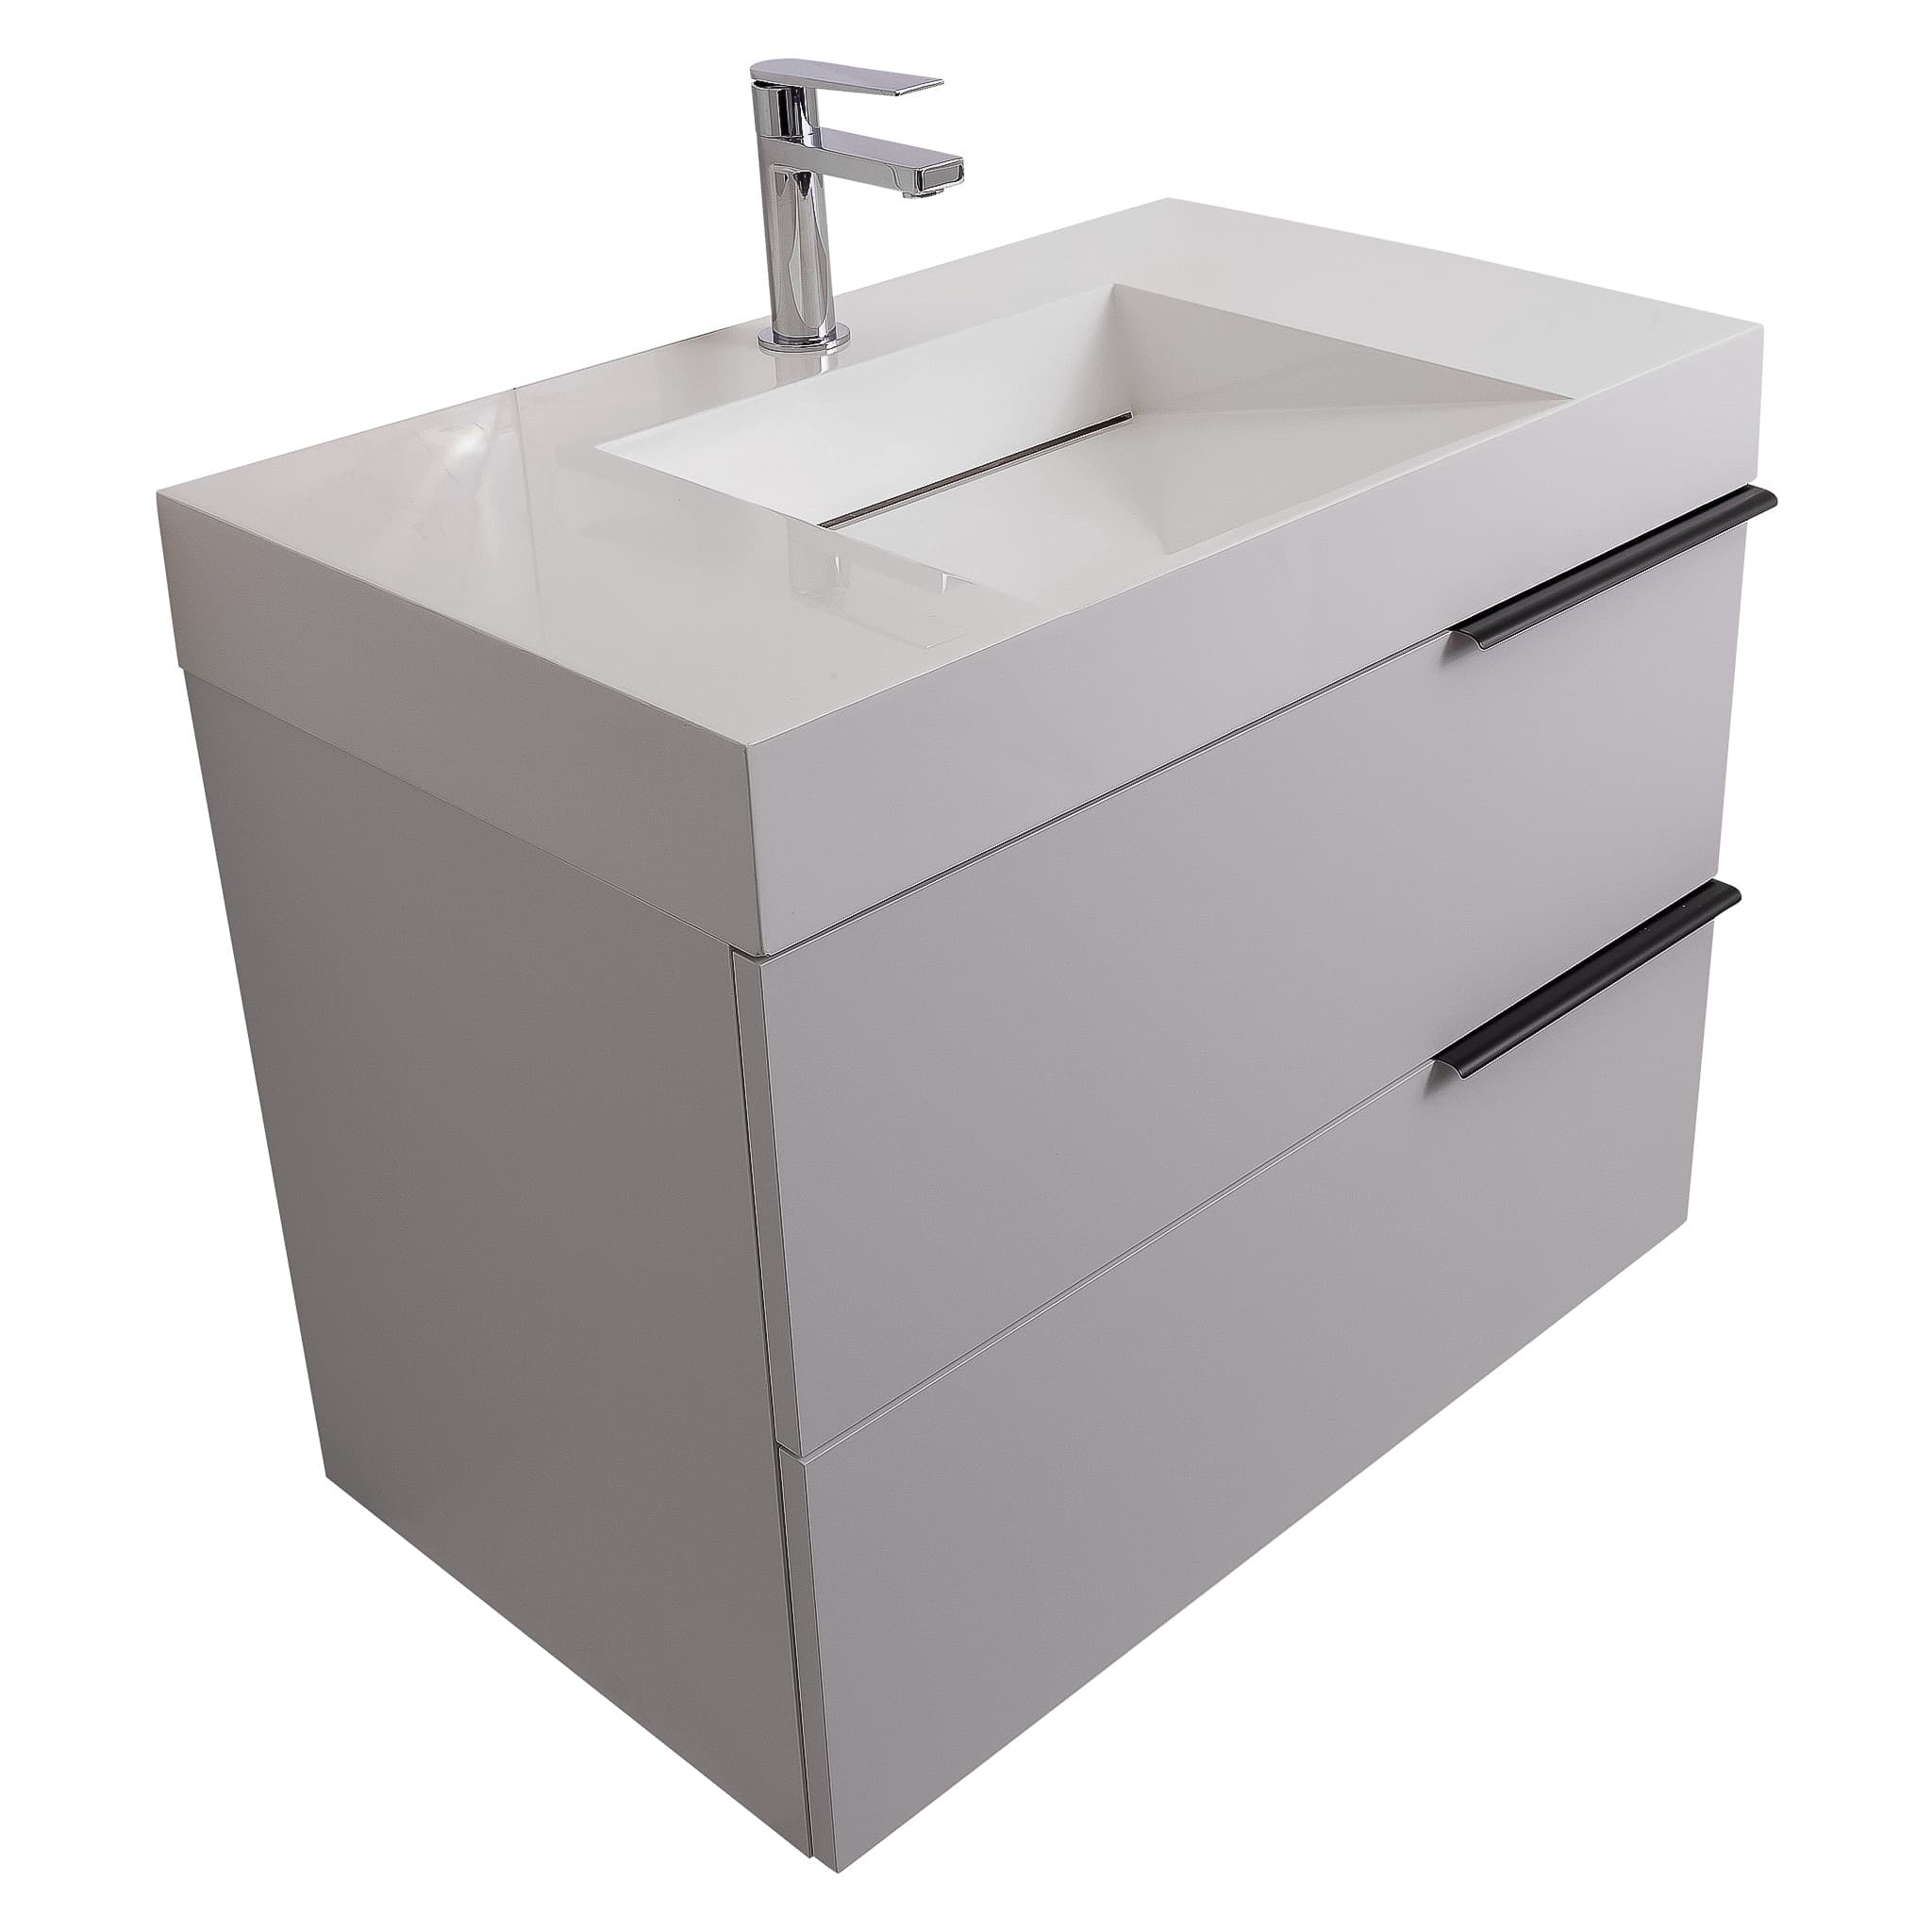 Mallorca 39.5 Matte White Cabinet, Infinity Cultured Marble Sink, Wall Mounted Modern Vanity Set